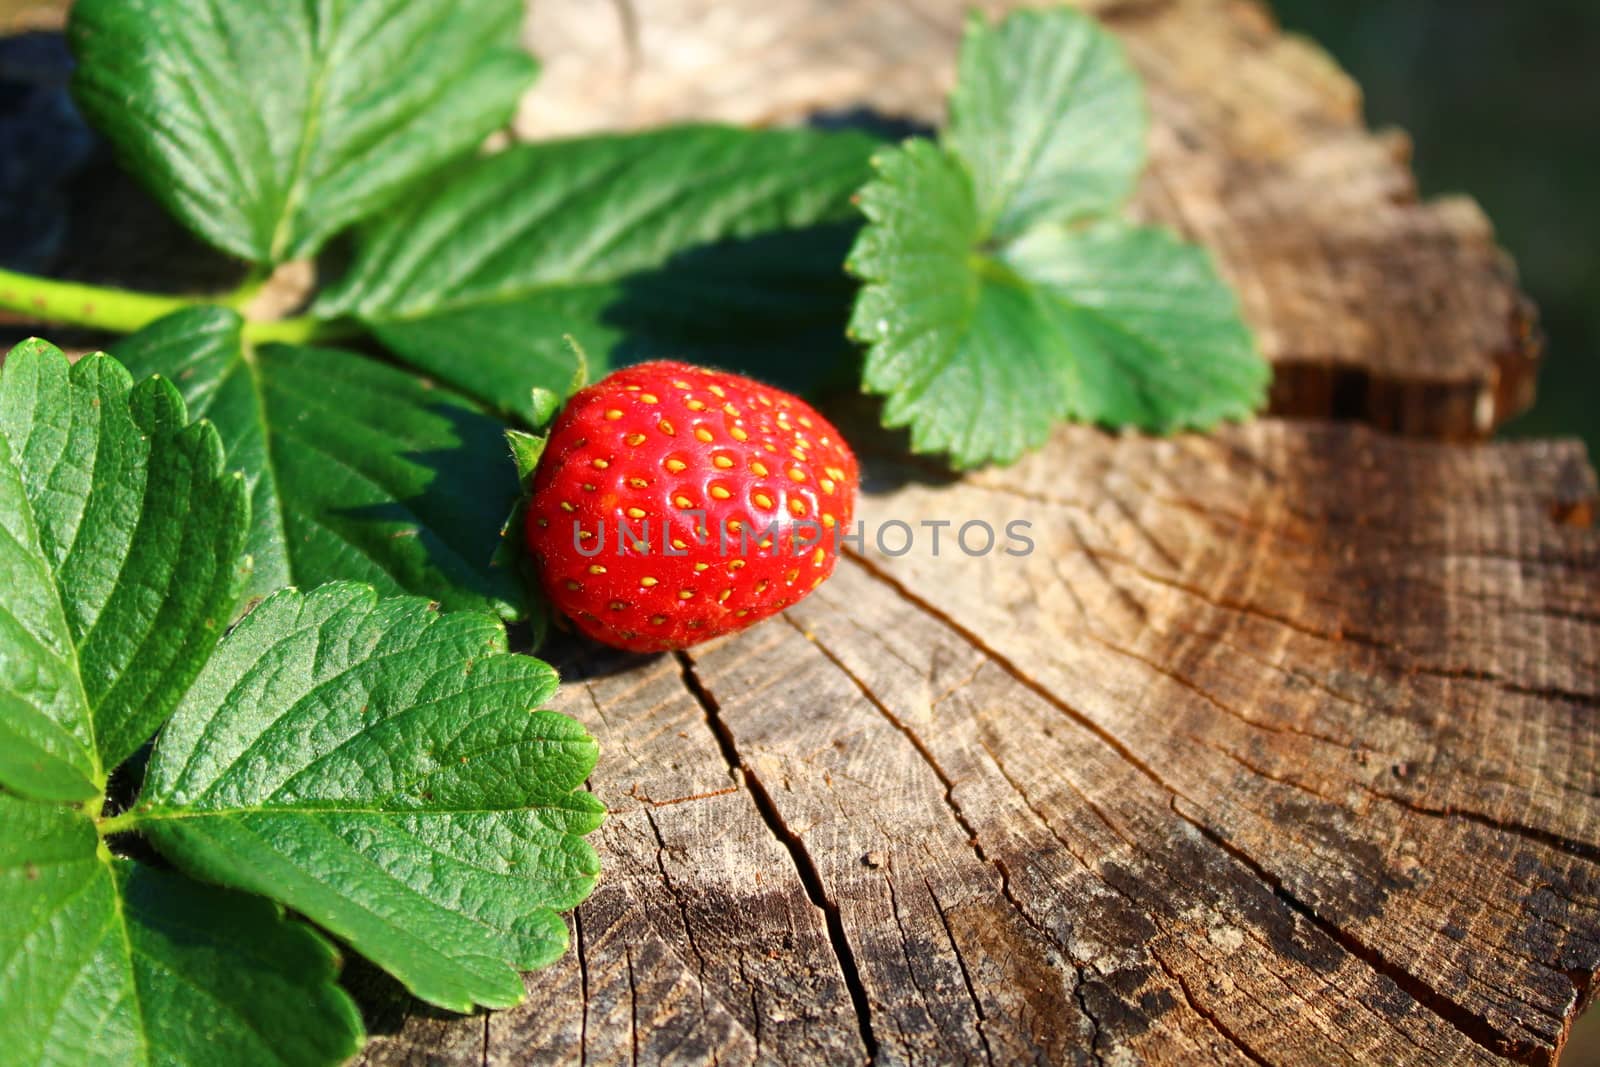 The picture shows strawberry and strawberry leaves.